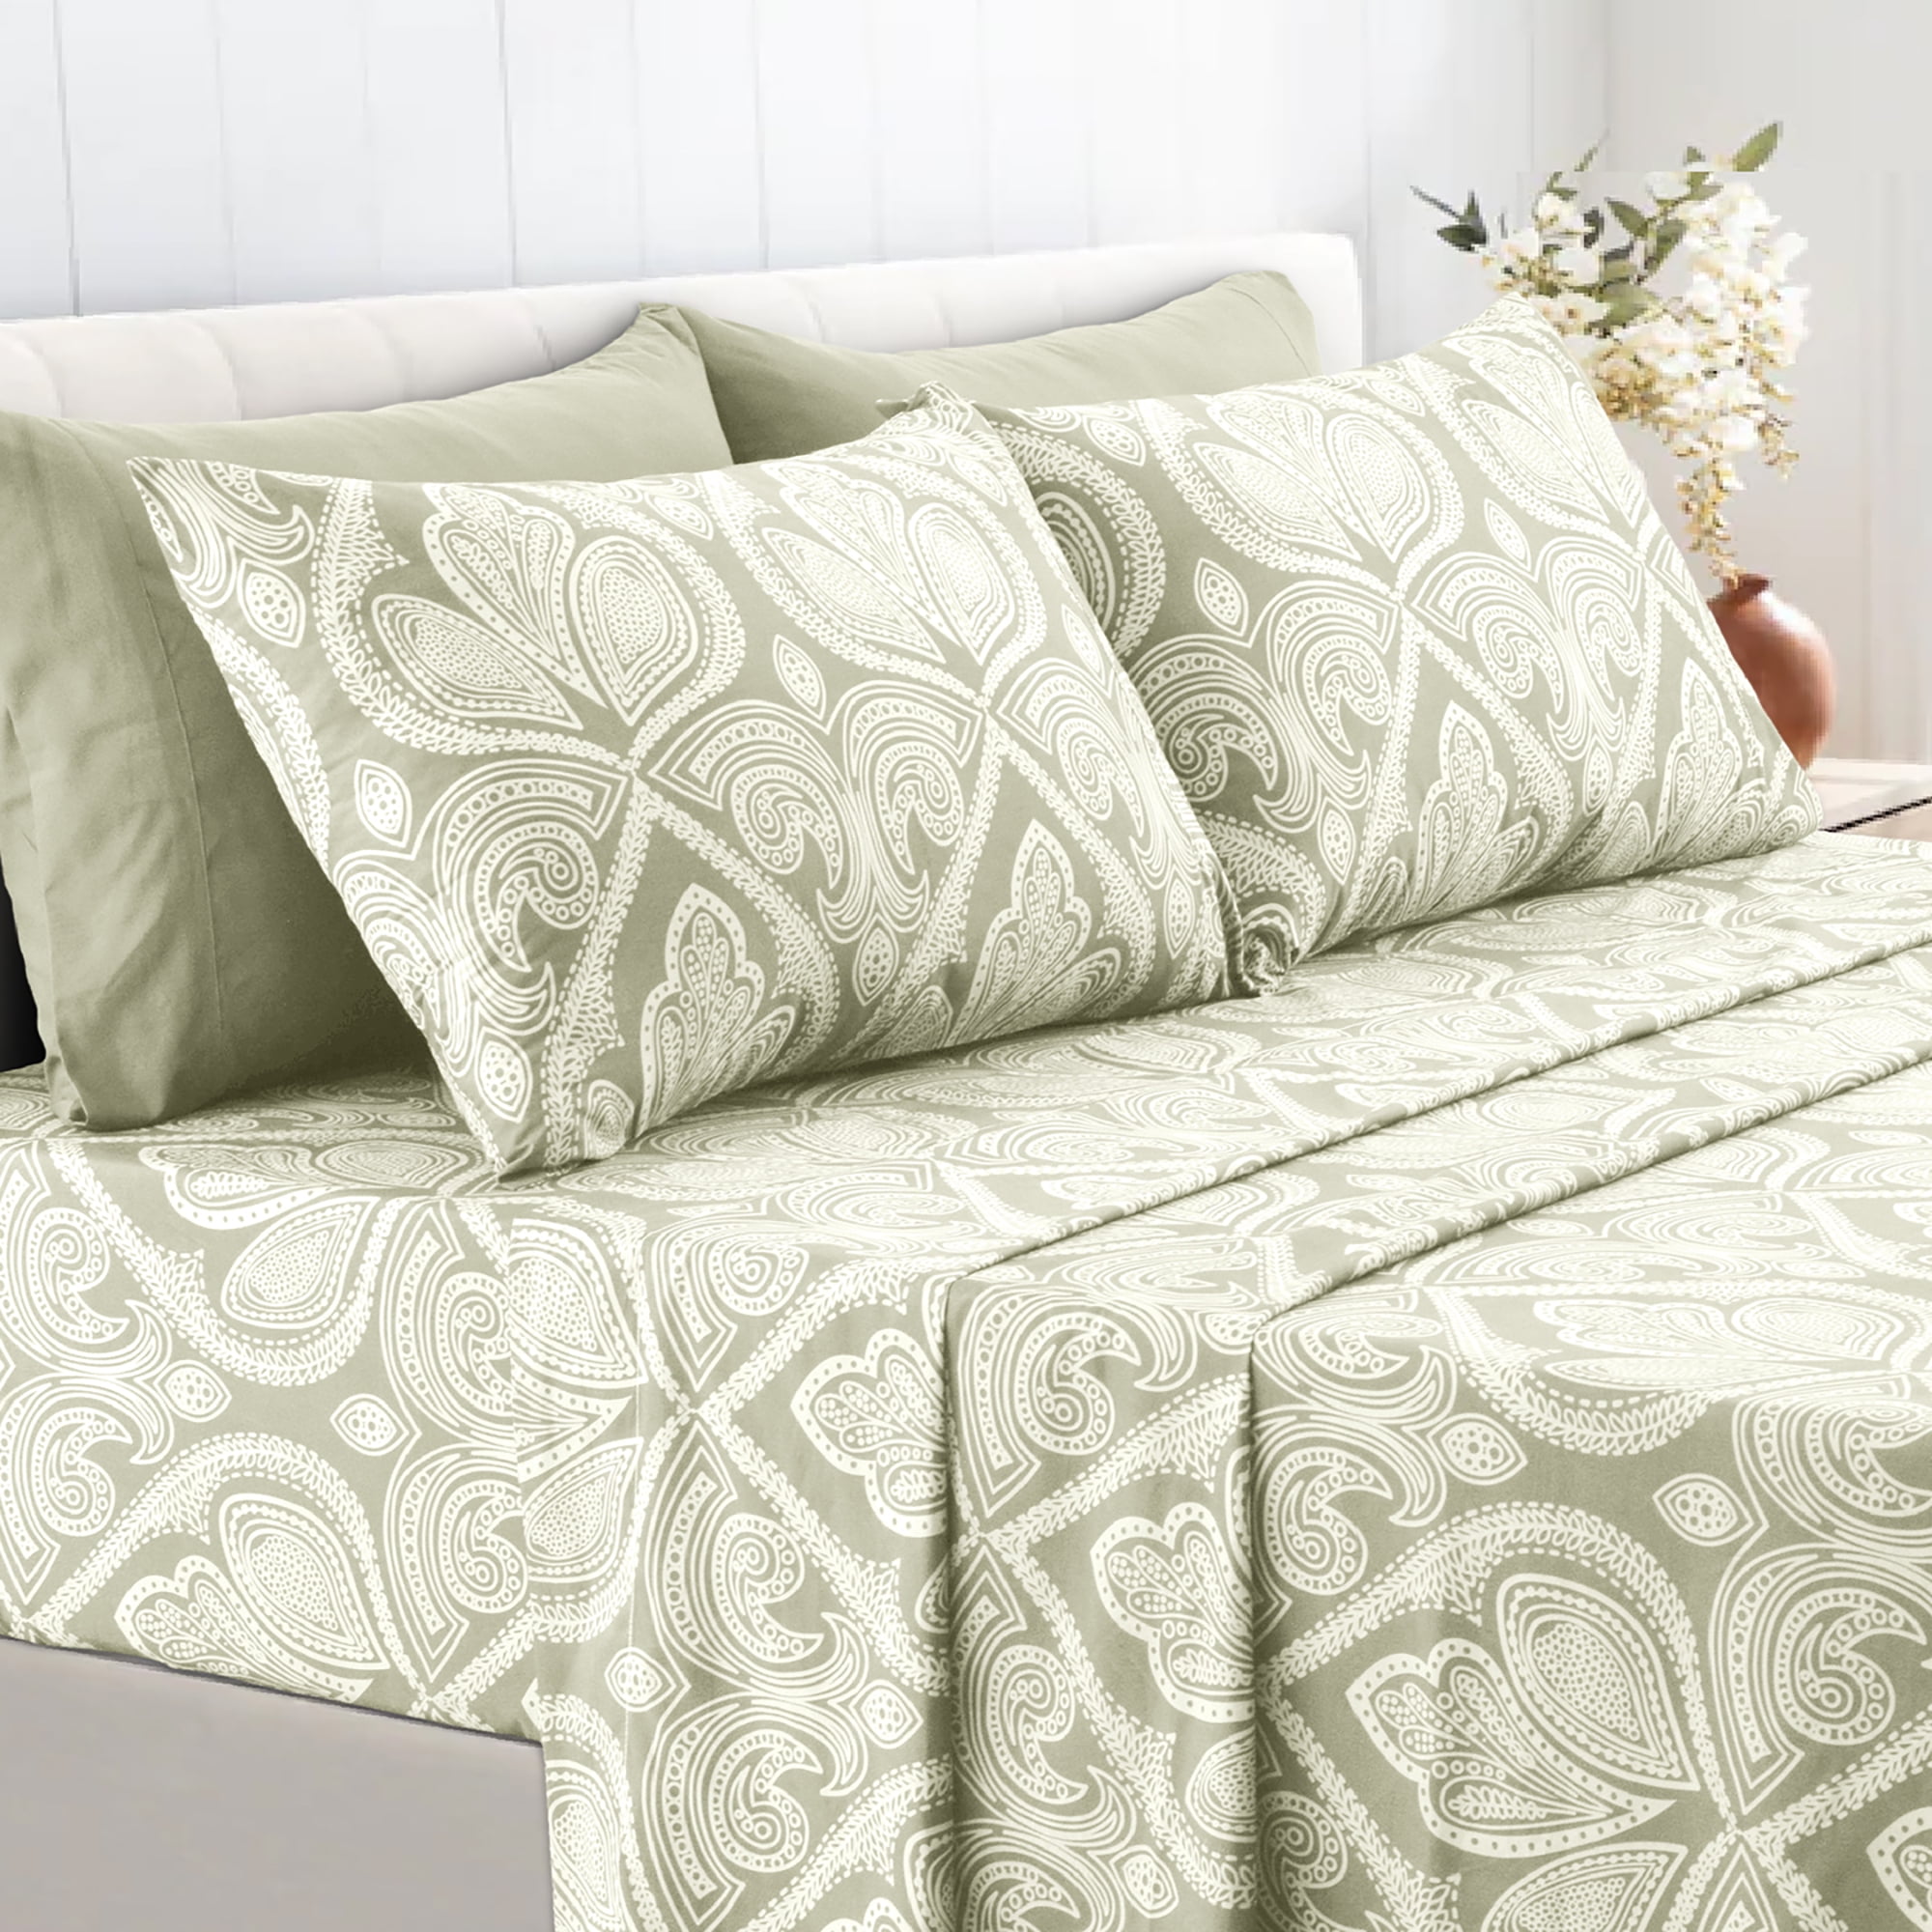 Details about   100% Cotton Luxury Bedding Sheet Set 600 TC In Sage,All Size And Pocket 